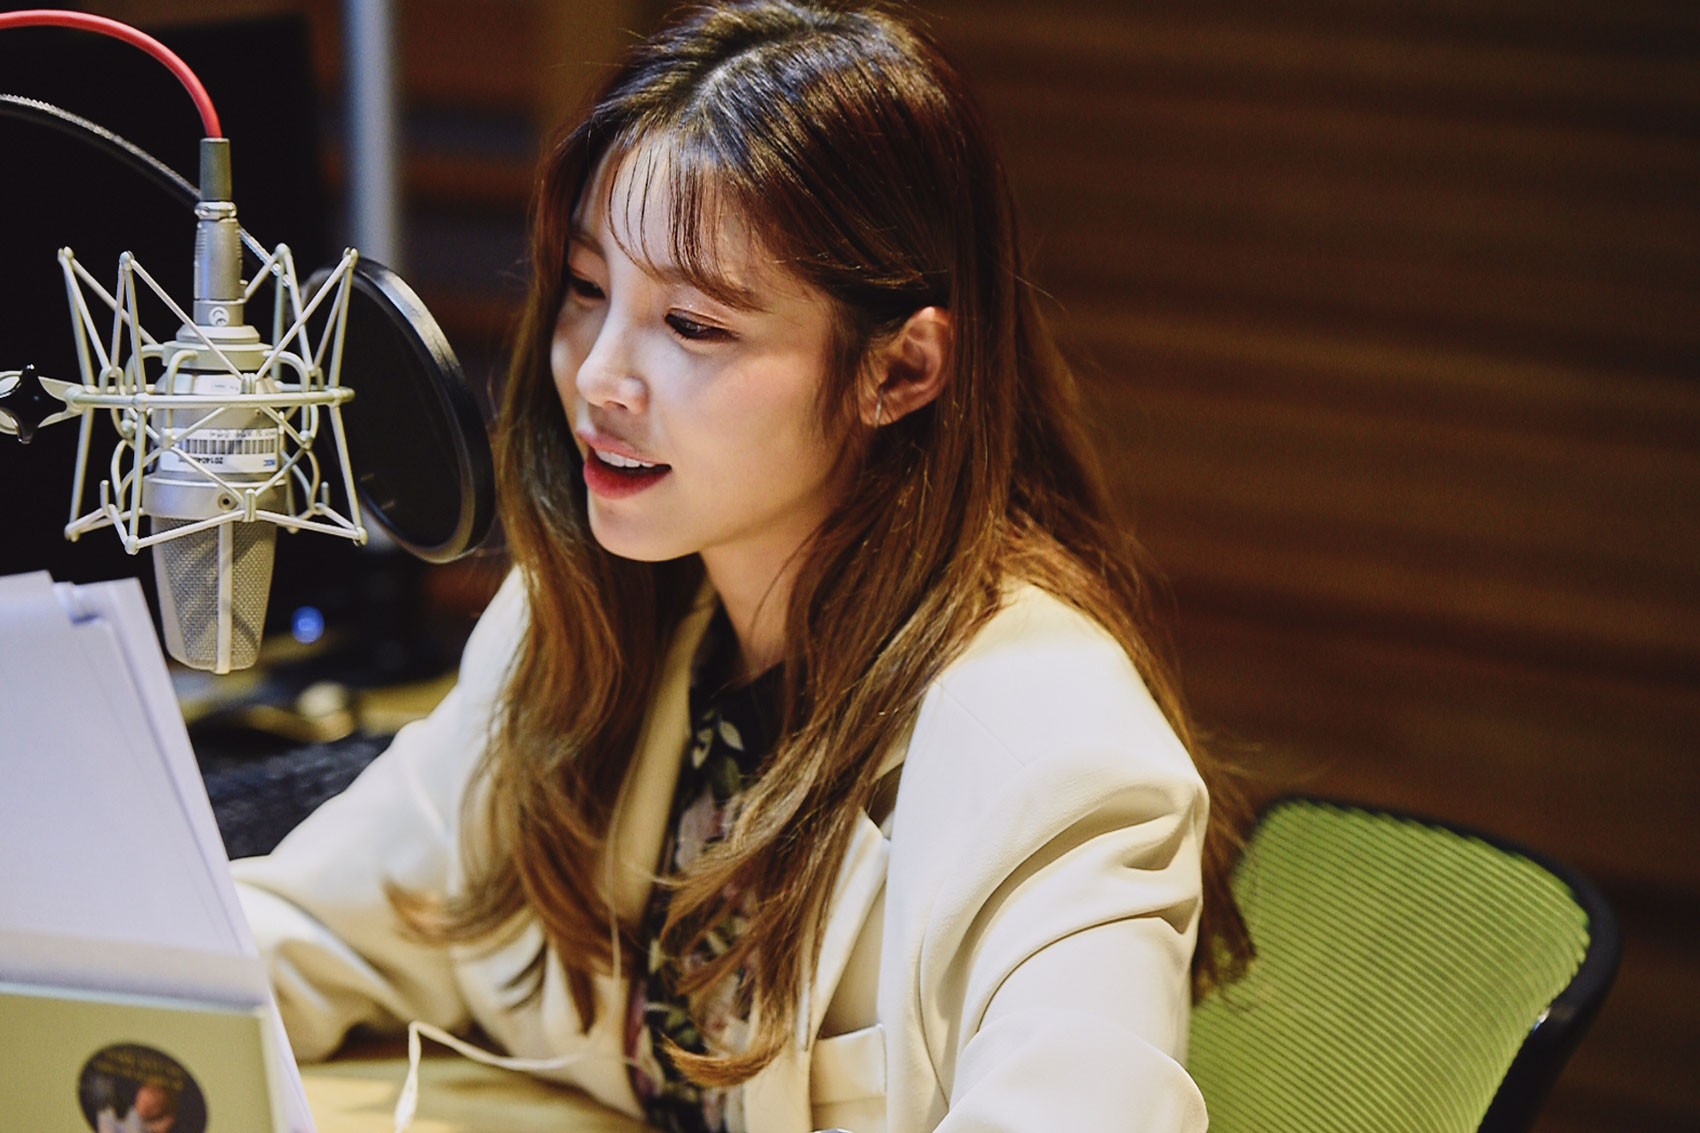 jun-hyosung-to-be-first-female-radio-dj-in-12-years-for-dreaming-radio-2